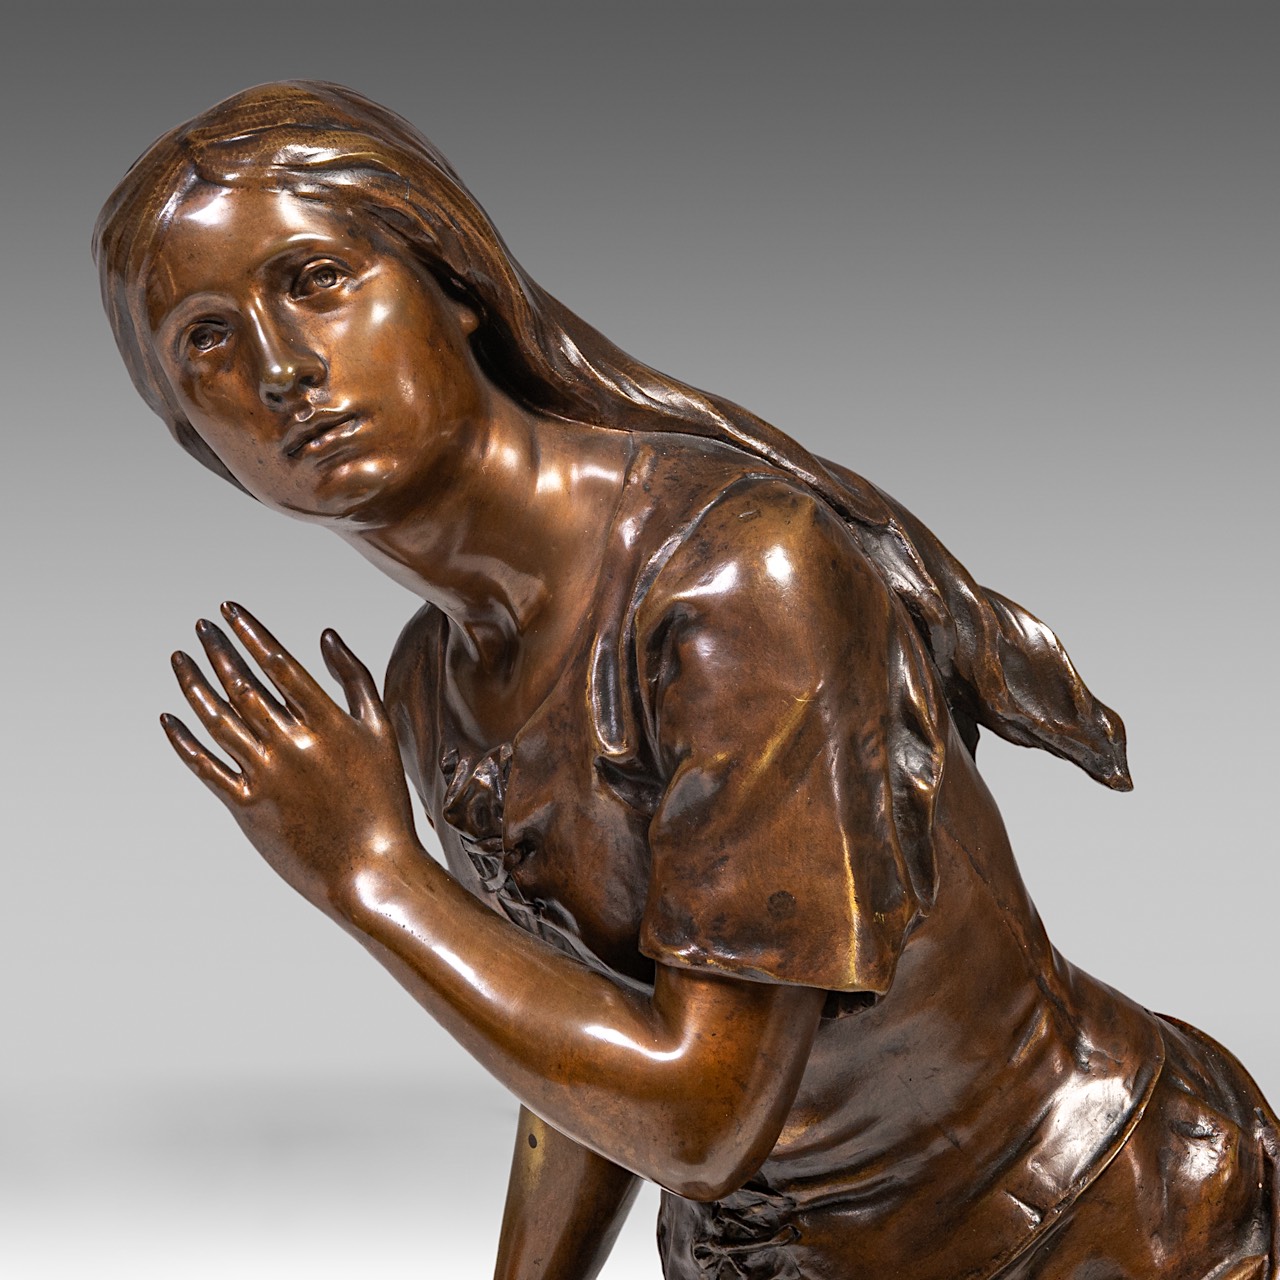 Mathurin Moreau (1822-1912), the spinner, patinated bronze, Hors Concours, H 89 cm - Image 8 of 8